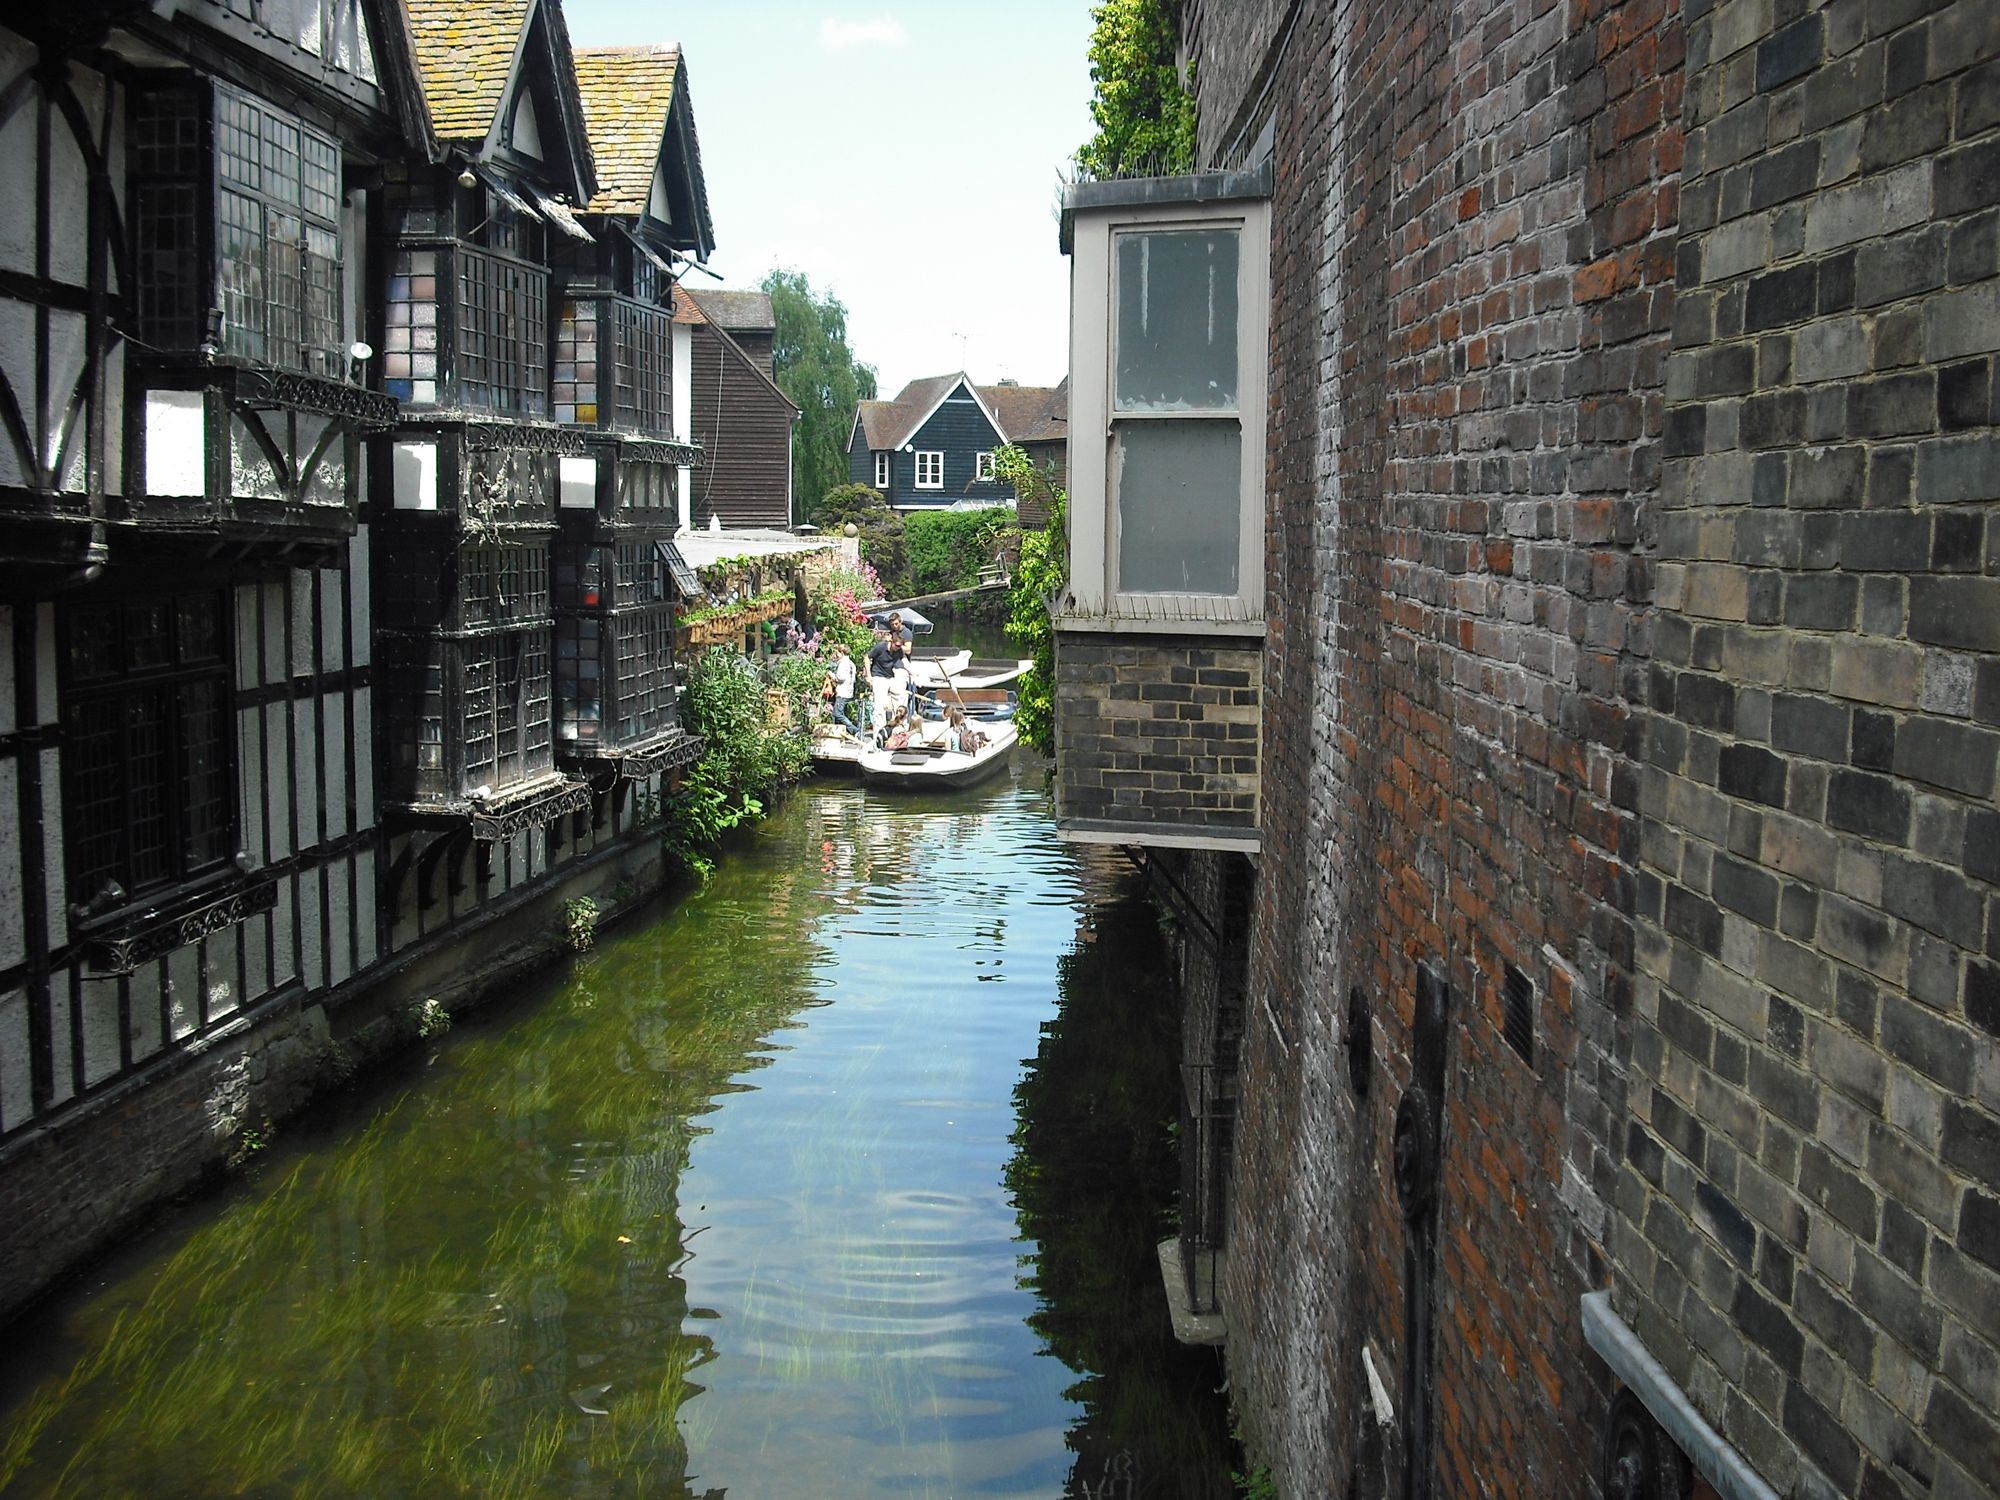 Hotels, B&Bs & Self-Catering in Canterbury